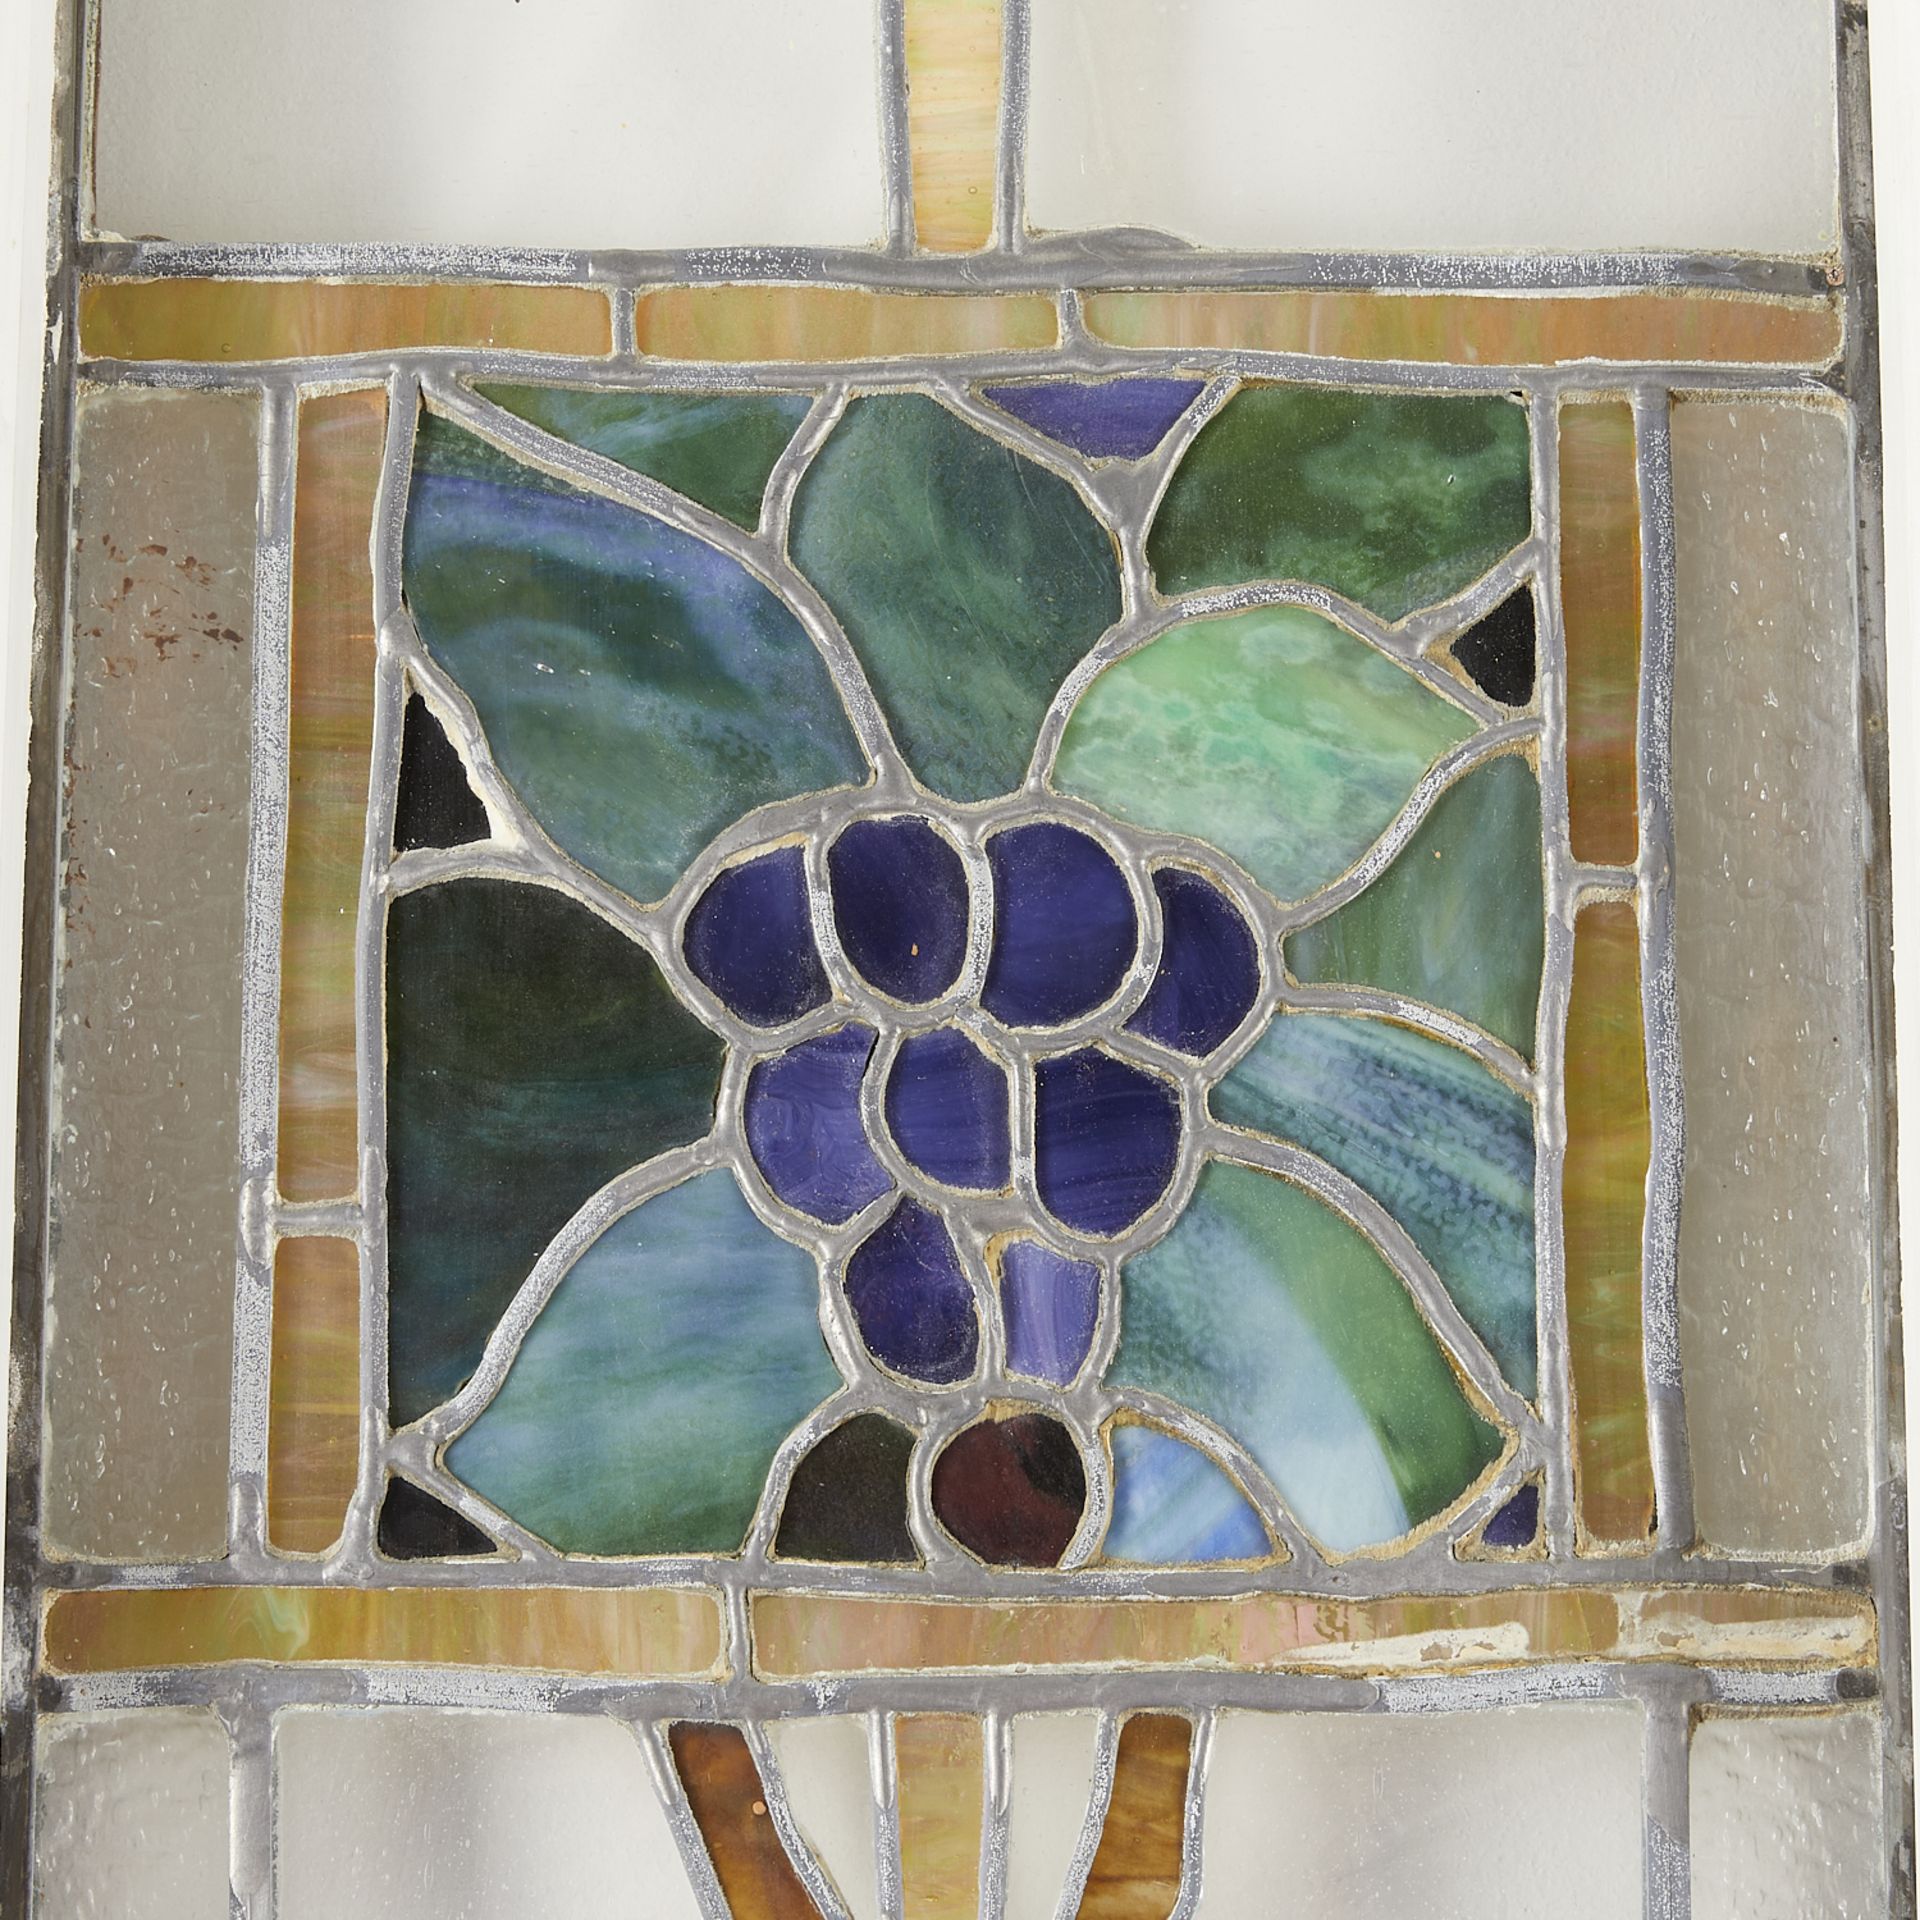 2 Antique Stained Glass Windows w/ Grapes - Image 2 of 12